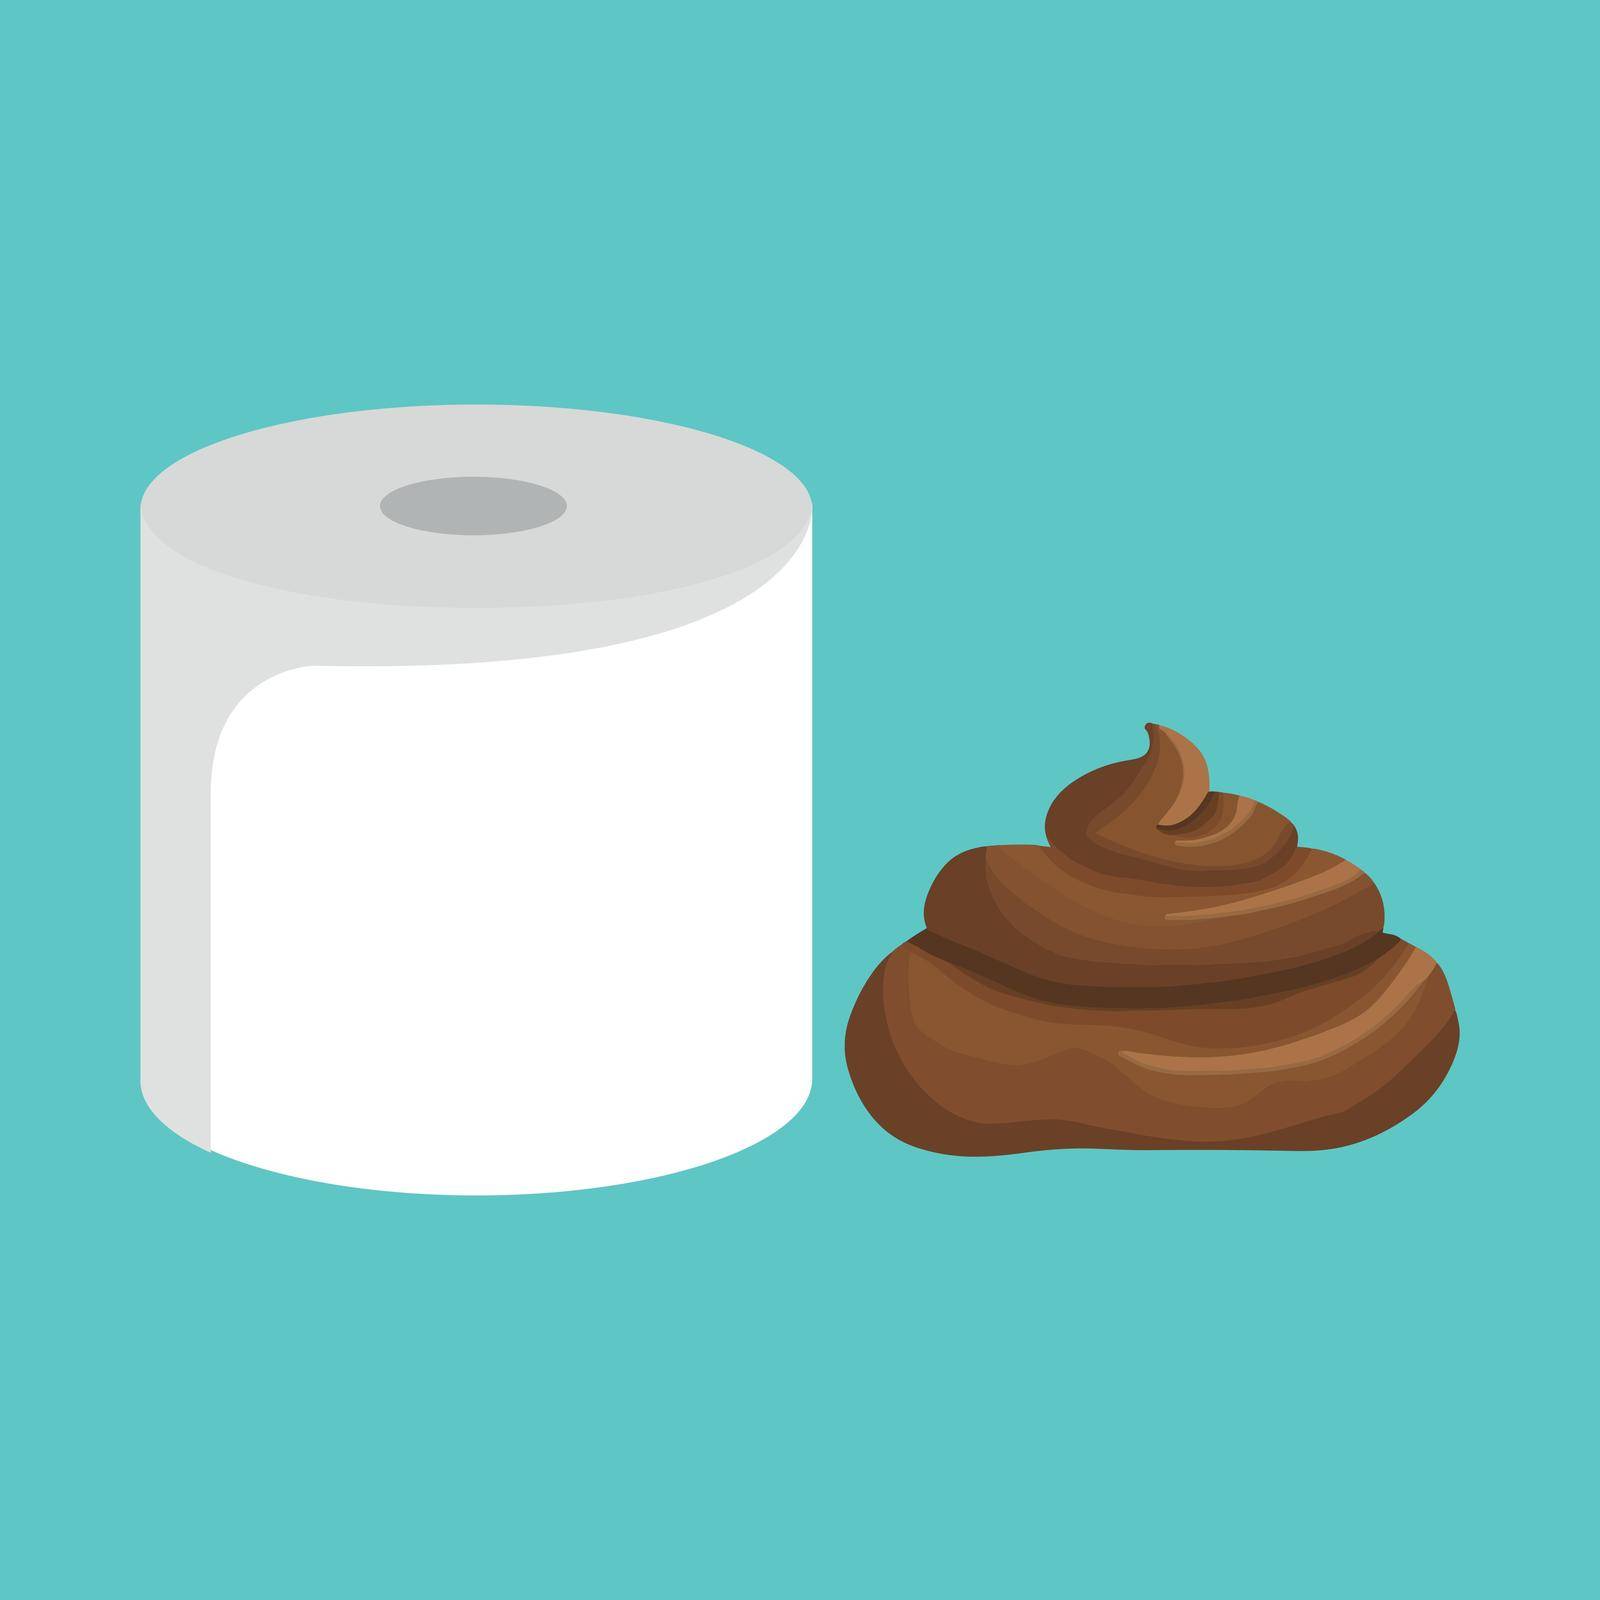 Roll of toilet paper and pile of dog poop in flat cartoon style. Funny excrement art. by Olga_OLiAN